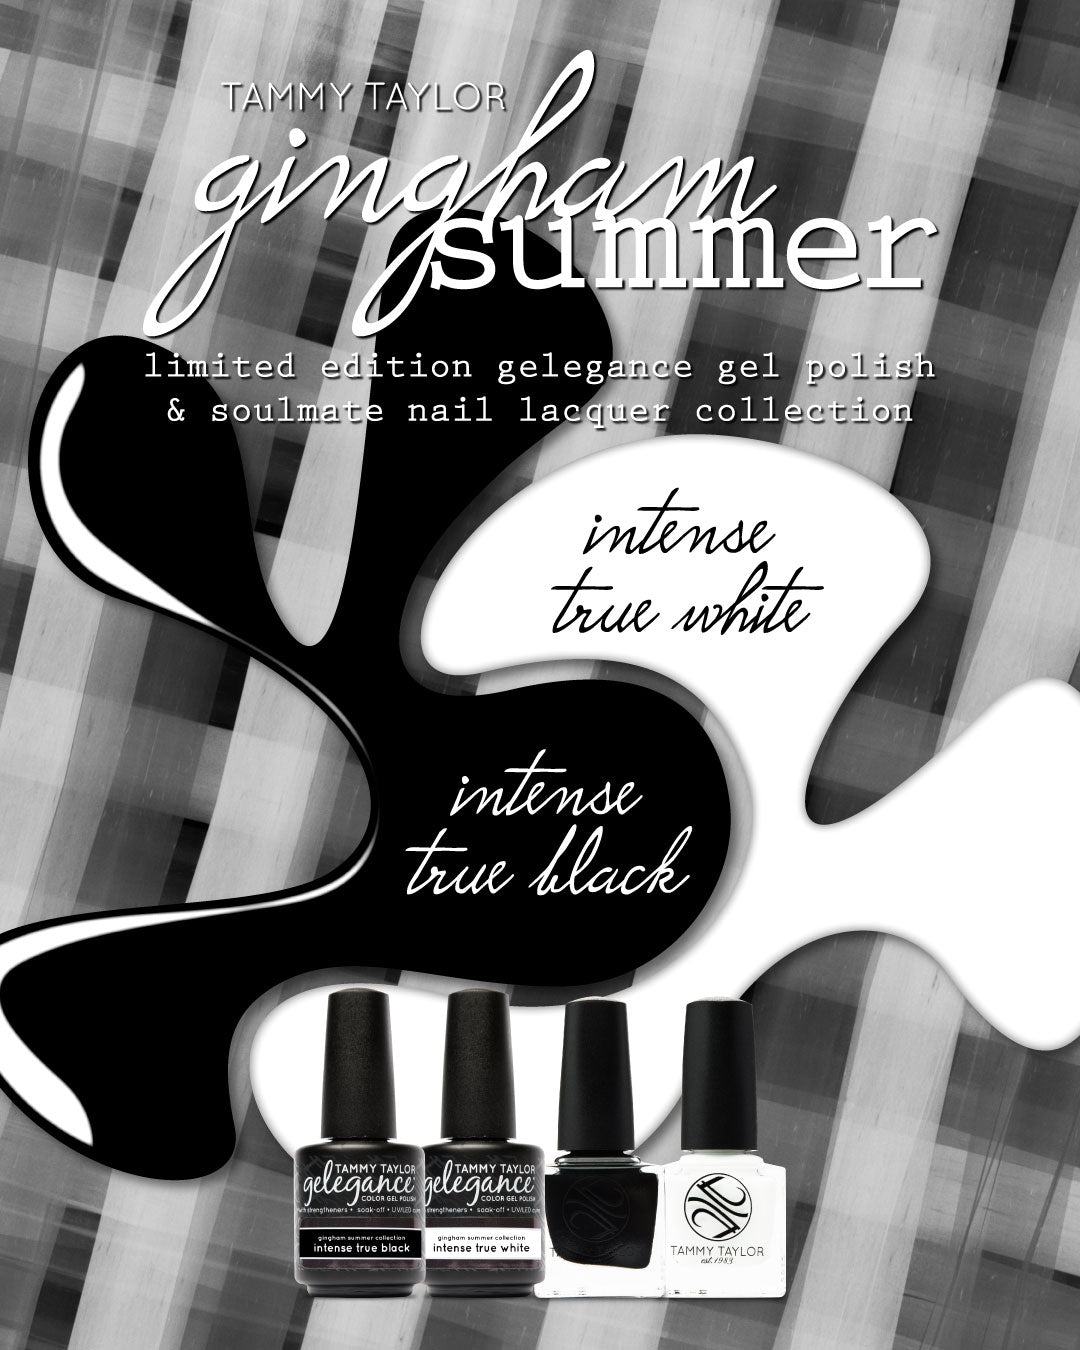 Tammy-Taylor-Gingham-Summer-Collection-IG-Slide-Ad-20240501-W1_ac3225c3-7103-449e-982b-d74dfcd6733e.jpg